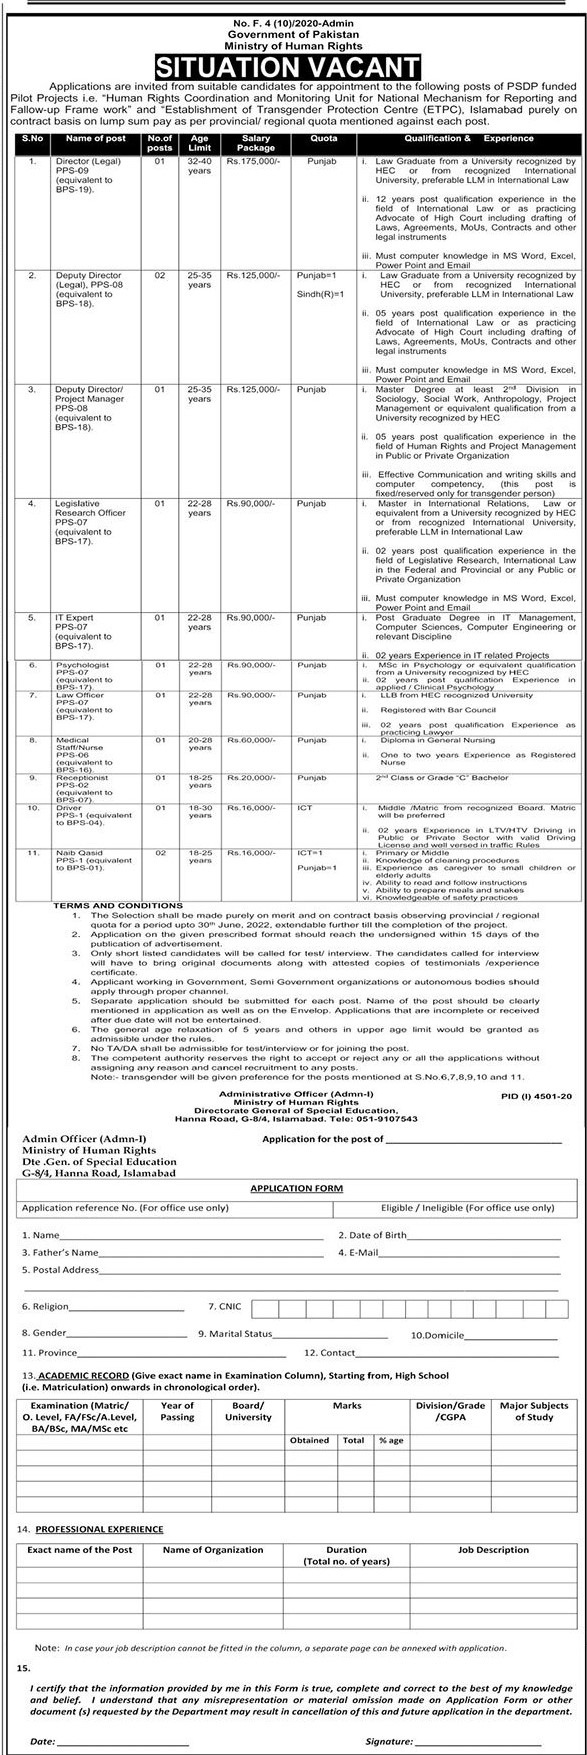 Download Ministry of Human Rights Jobs 2021 Application Form - Jobs in Pakistan 2021 - Jobs in Islamabad 2021 - Jobs For Primary, Middle, Matric, Intermediate Degree, Bachelor Degree, Master Degree Base